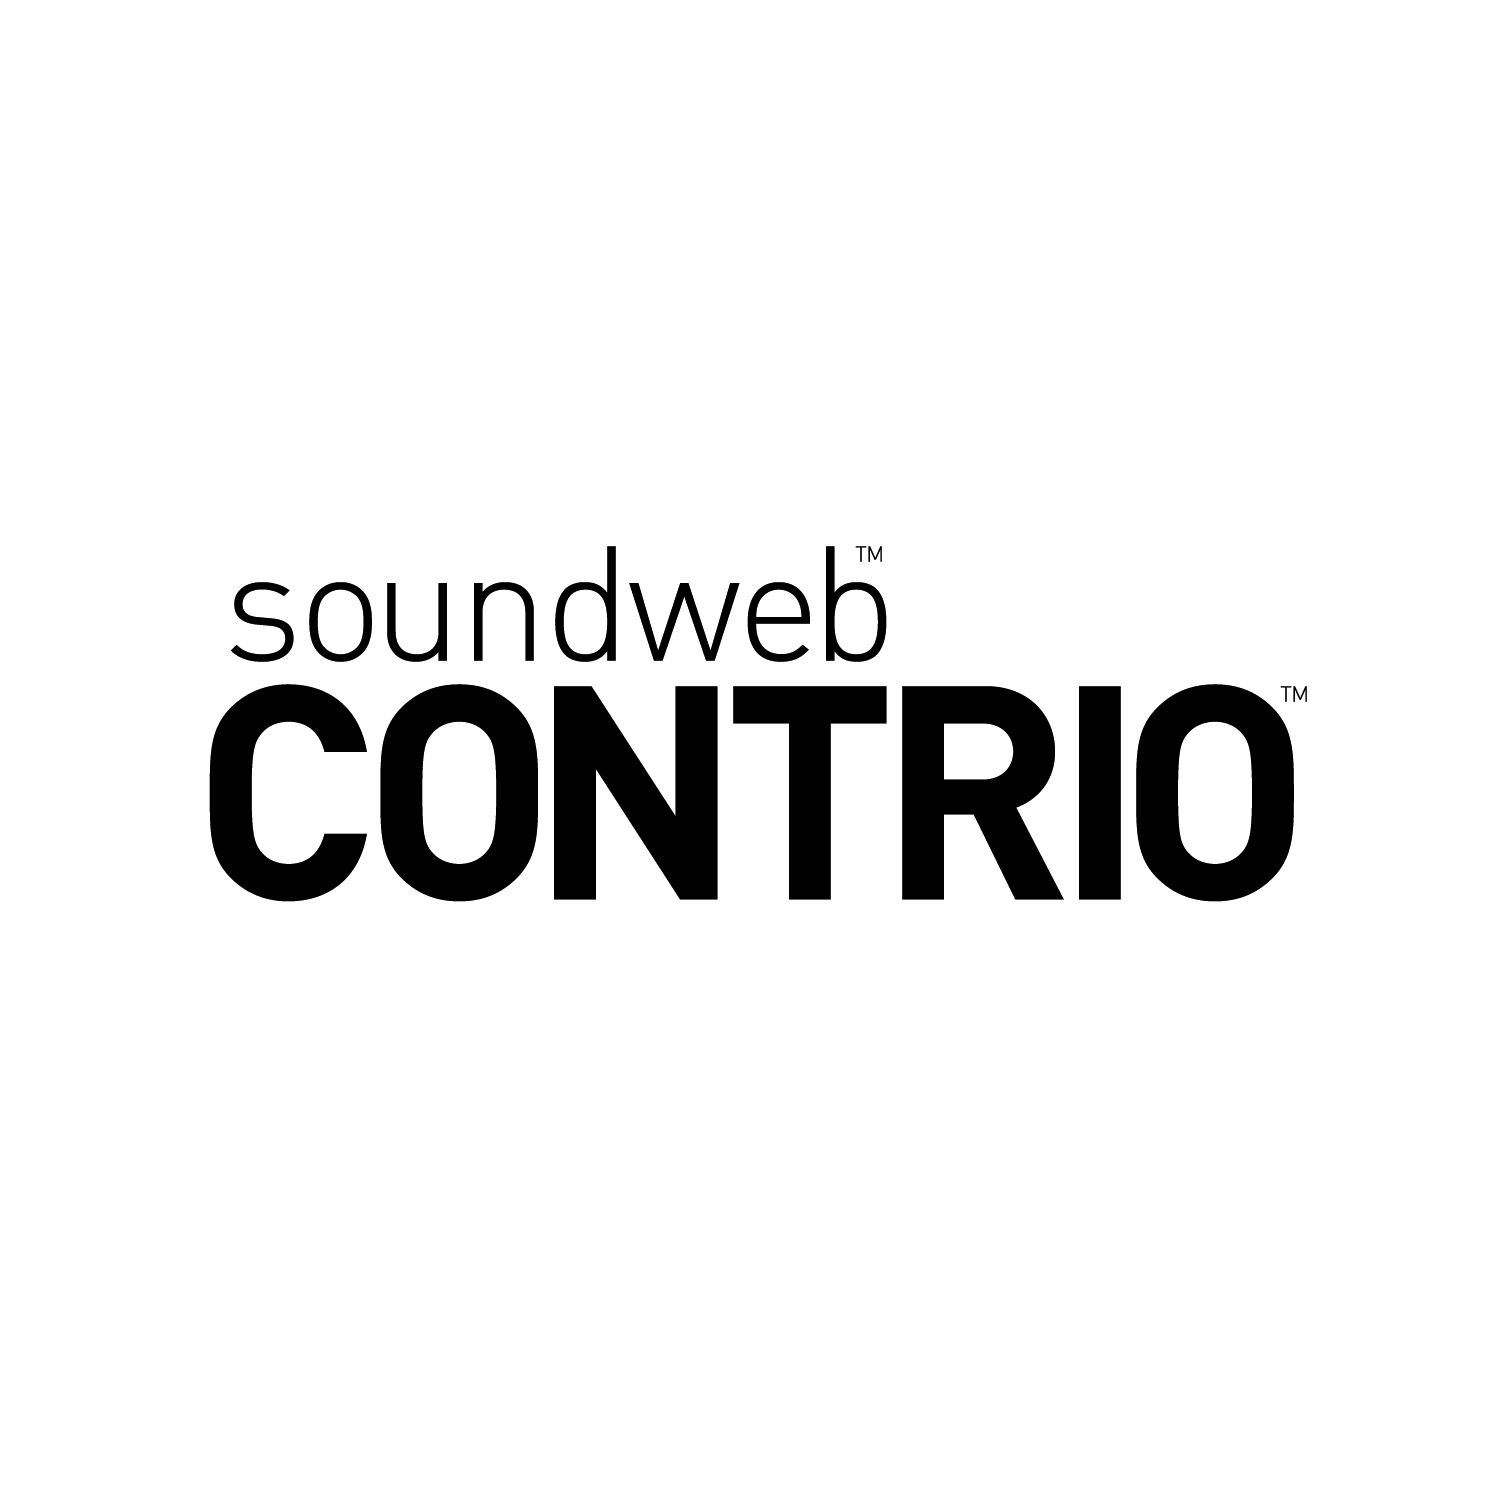 BSS Audio Introduces Soundweb™ Contrio™ Platform, Developed to Deliver Game-Changing System Control Capabilities for Networked Audio Applications   